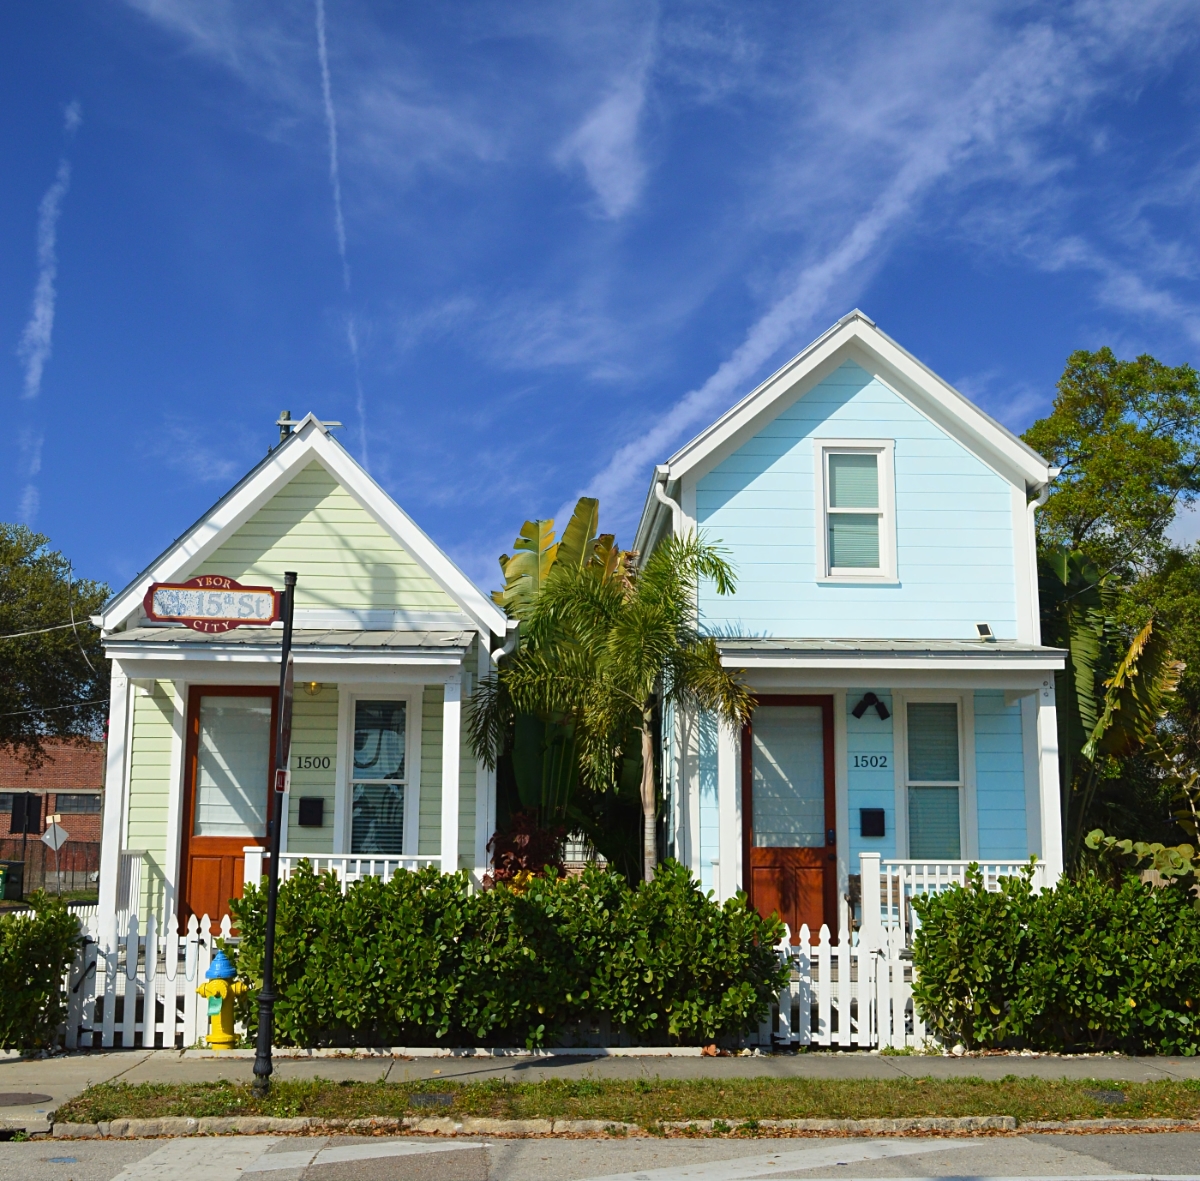 New build tiny homes designed to look historic, available on Airbnb, in Ybor City